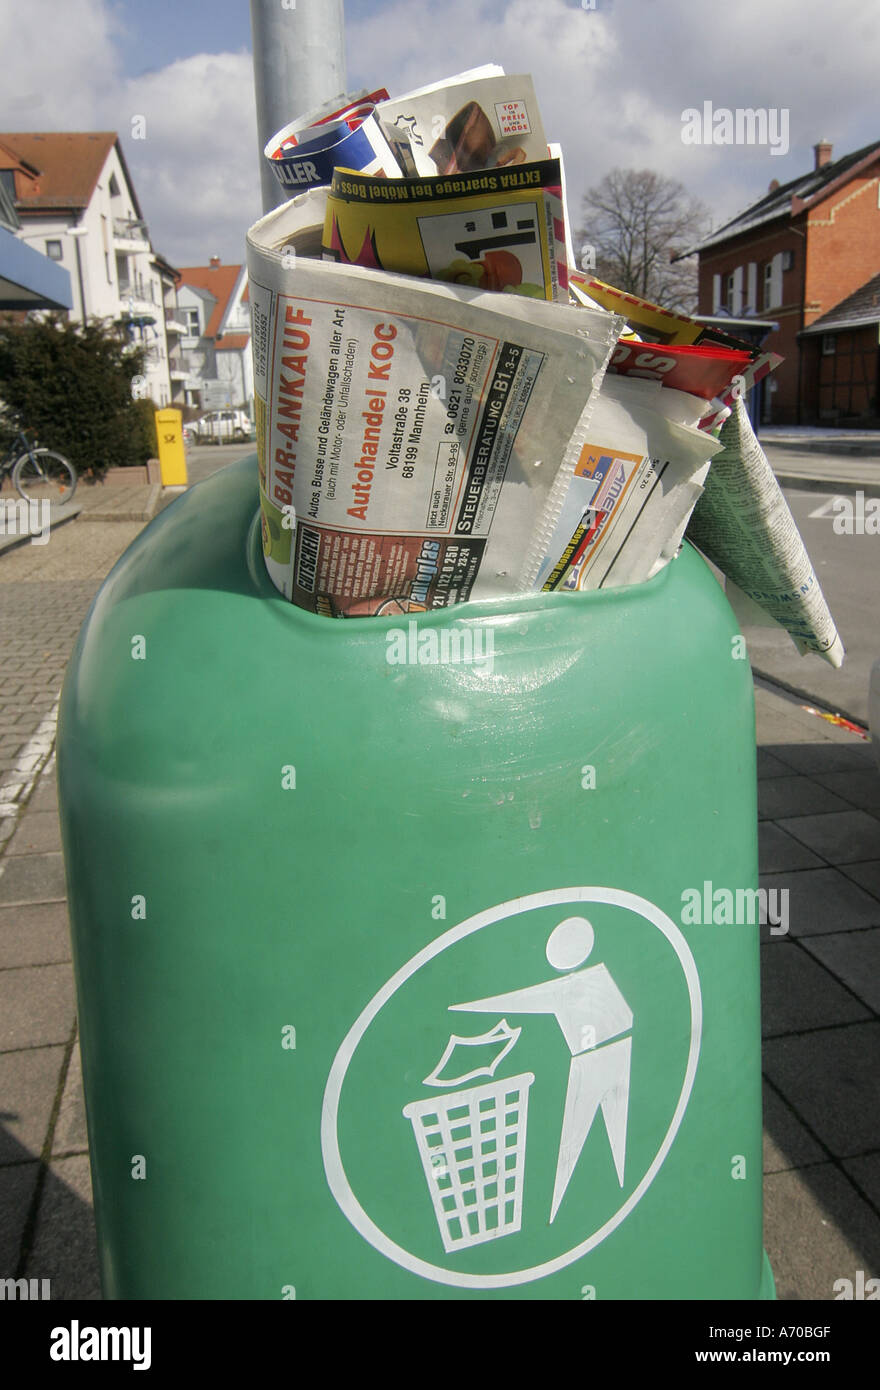 Trash can with old newspaper Stock Photo - Alamy